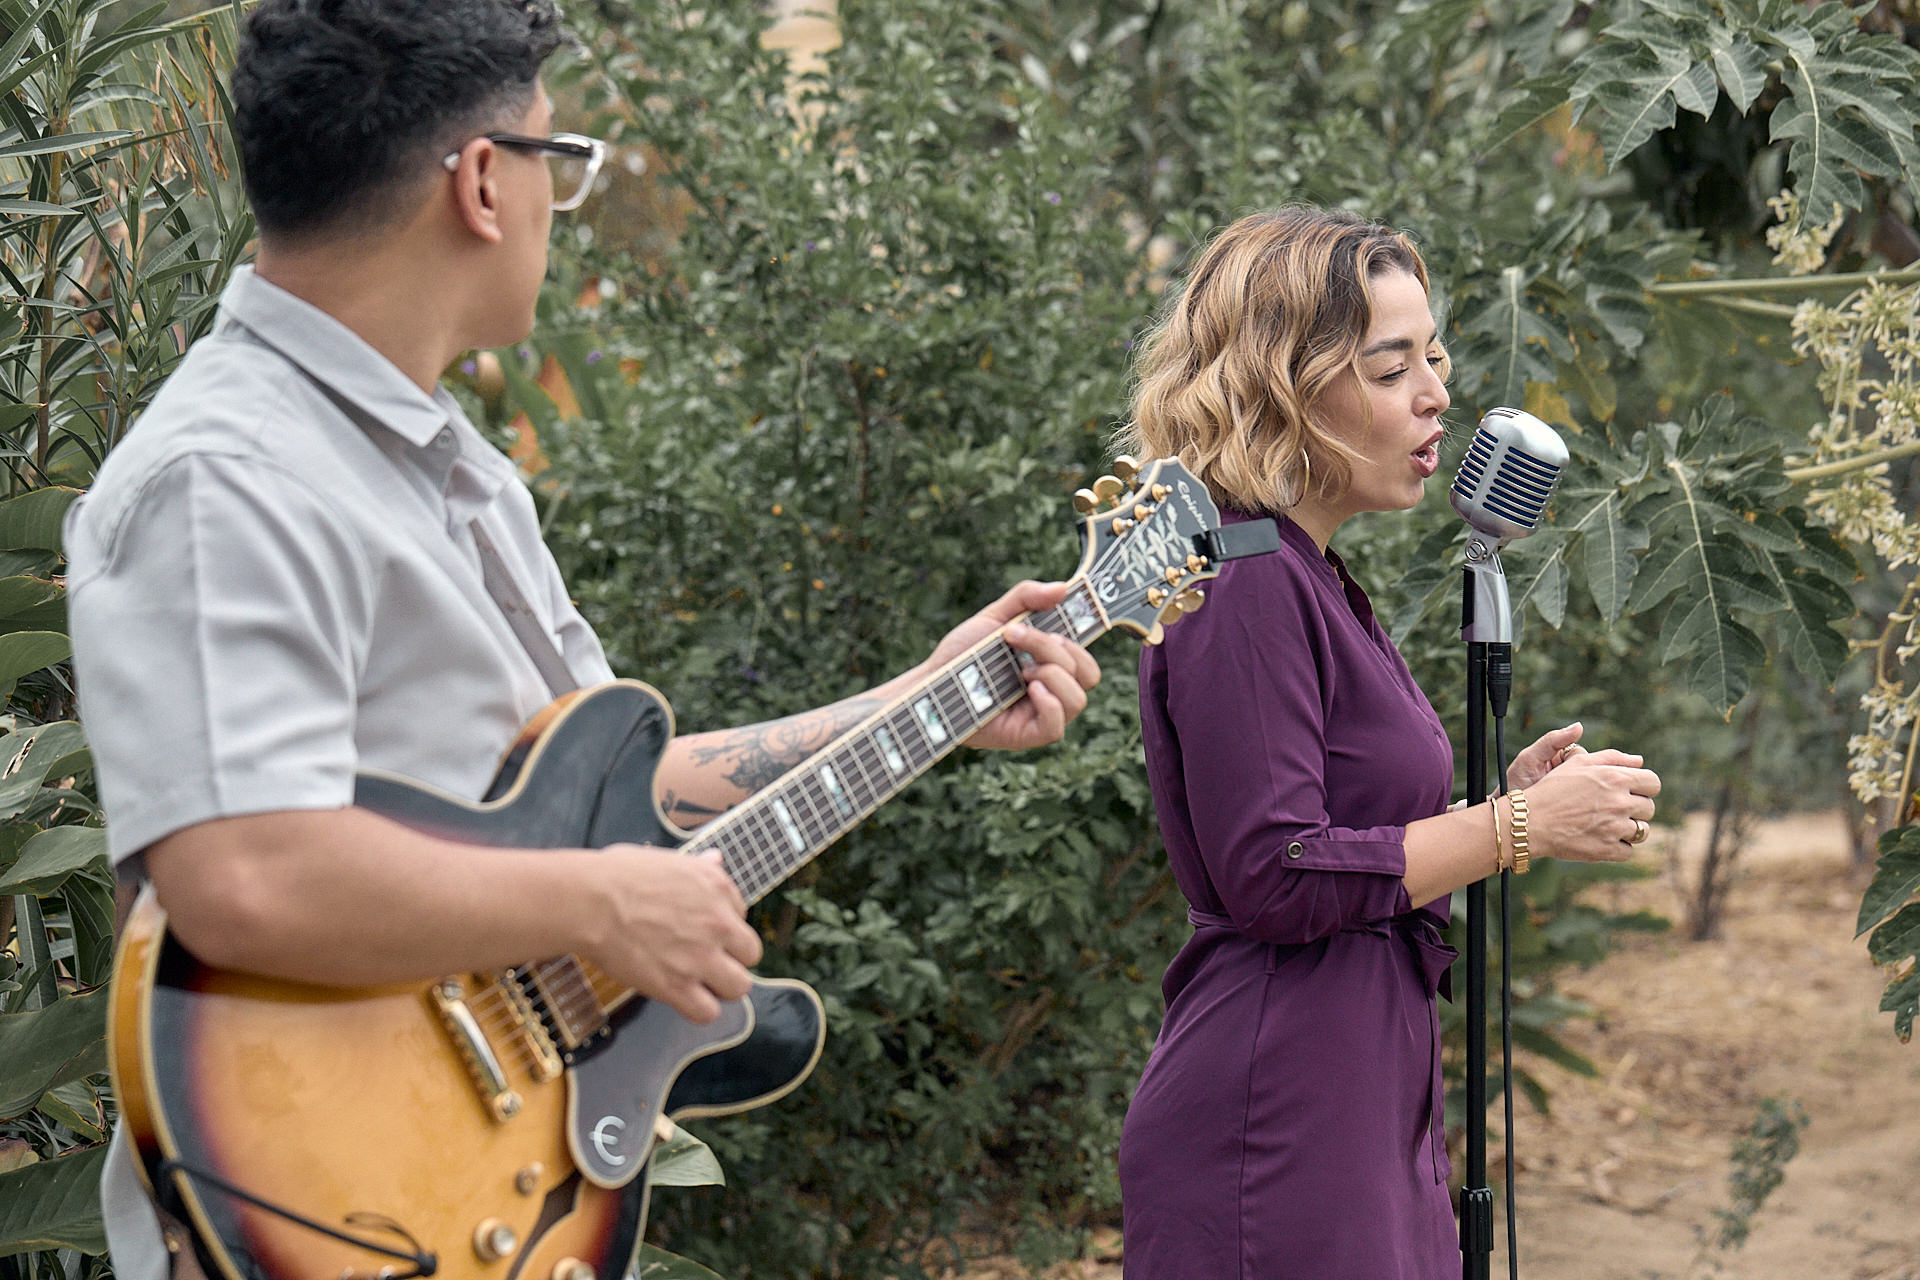 A man and woman singing and playing guitar in a field.